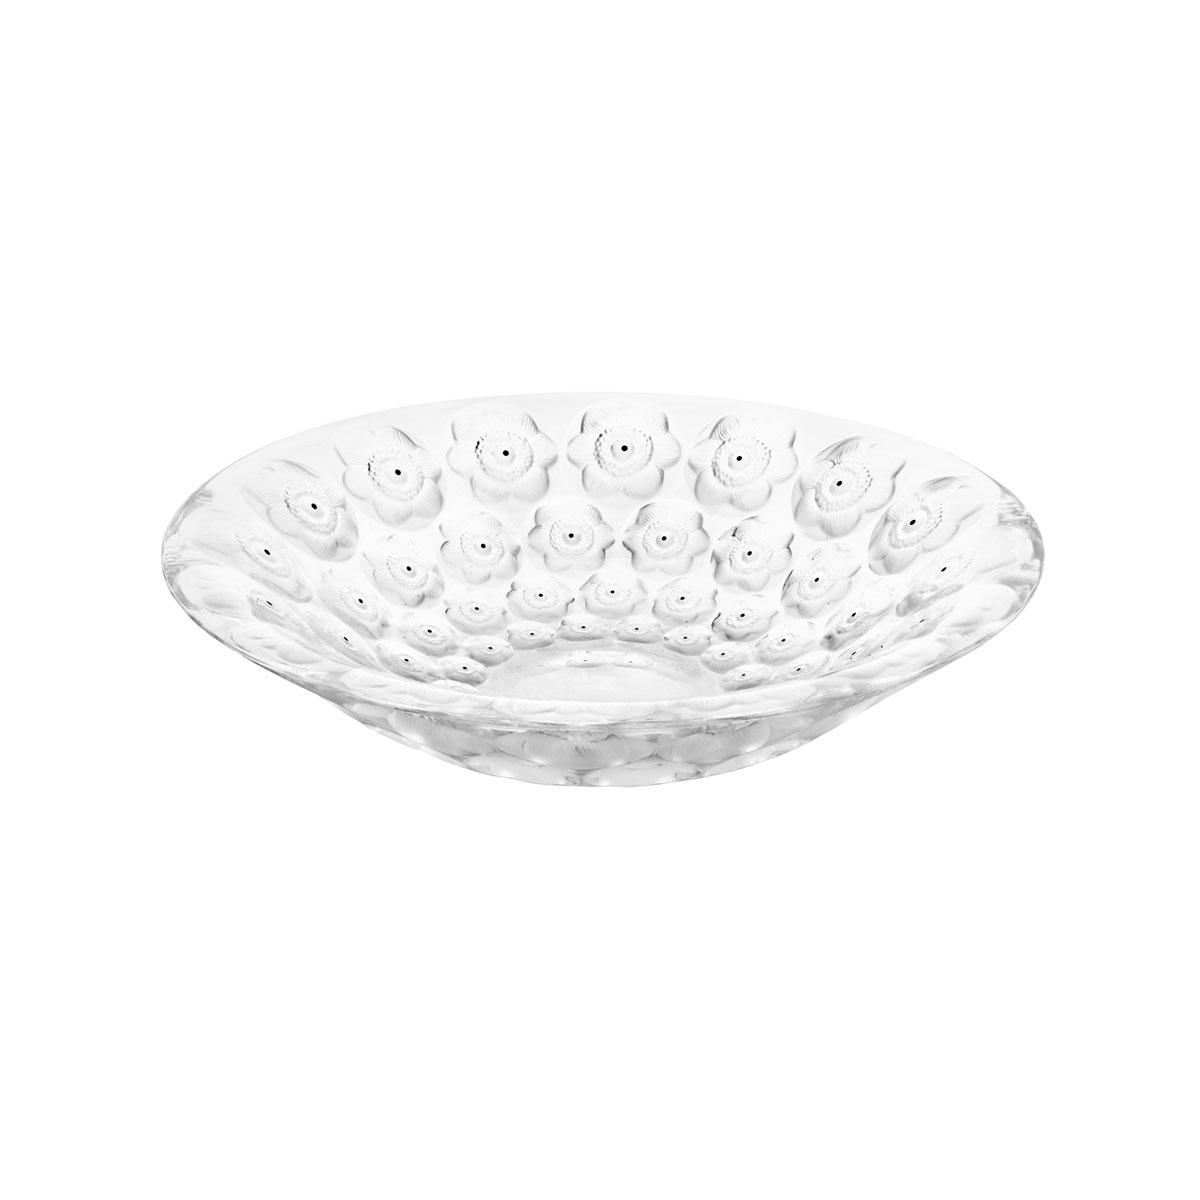 Lalique Anemones 12" Bowl, Clear and Black Enamelled